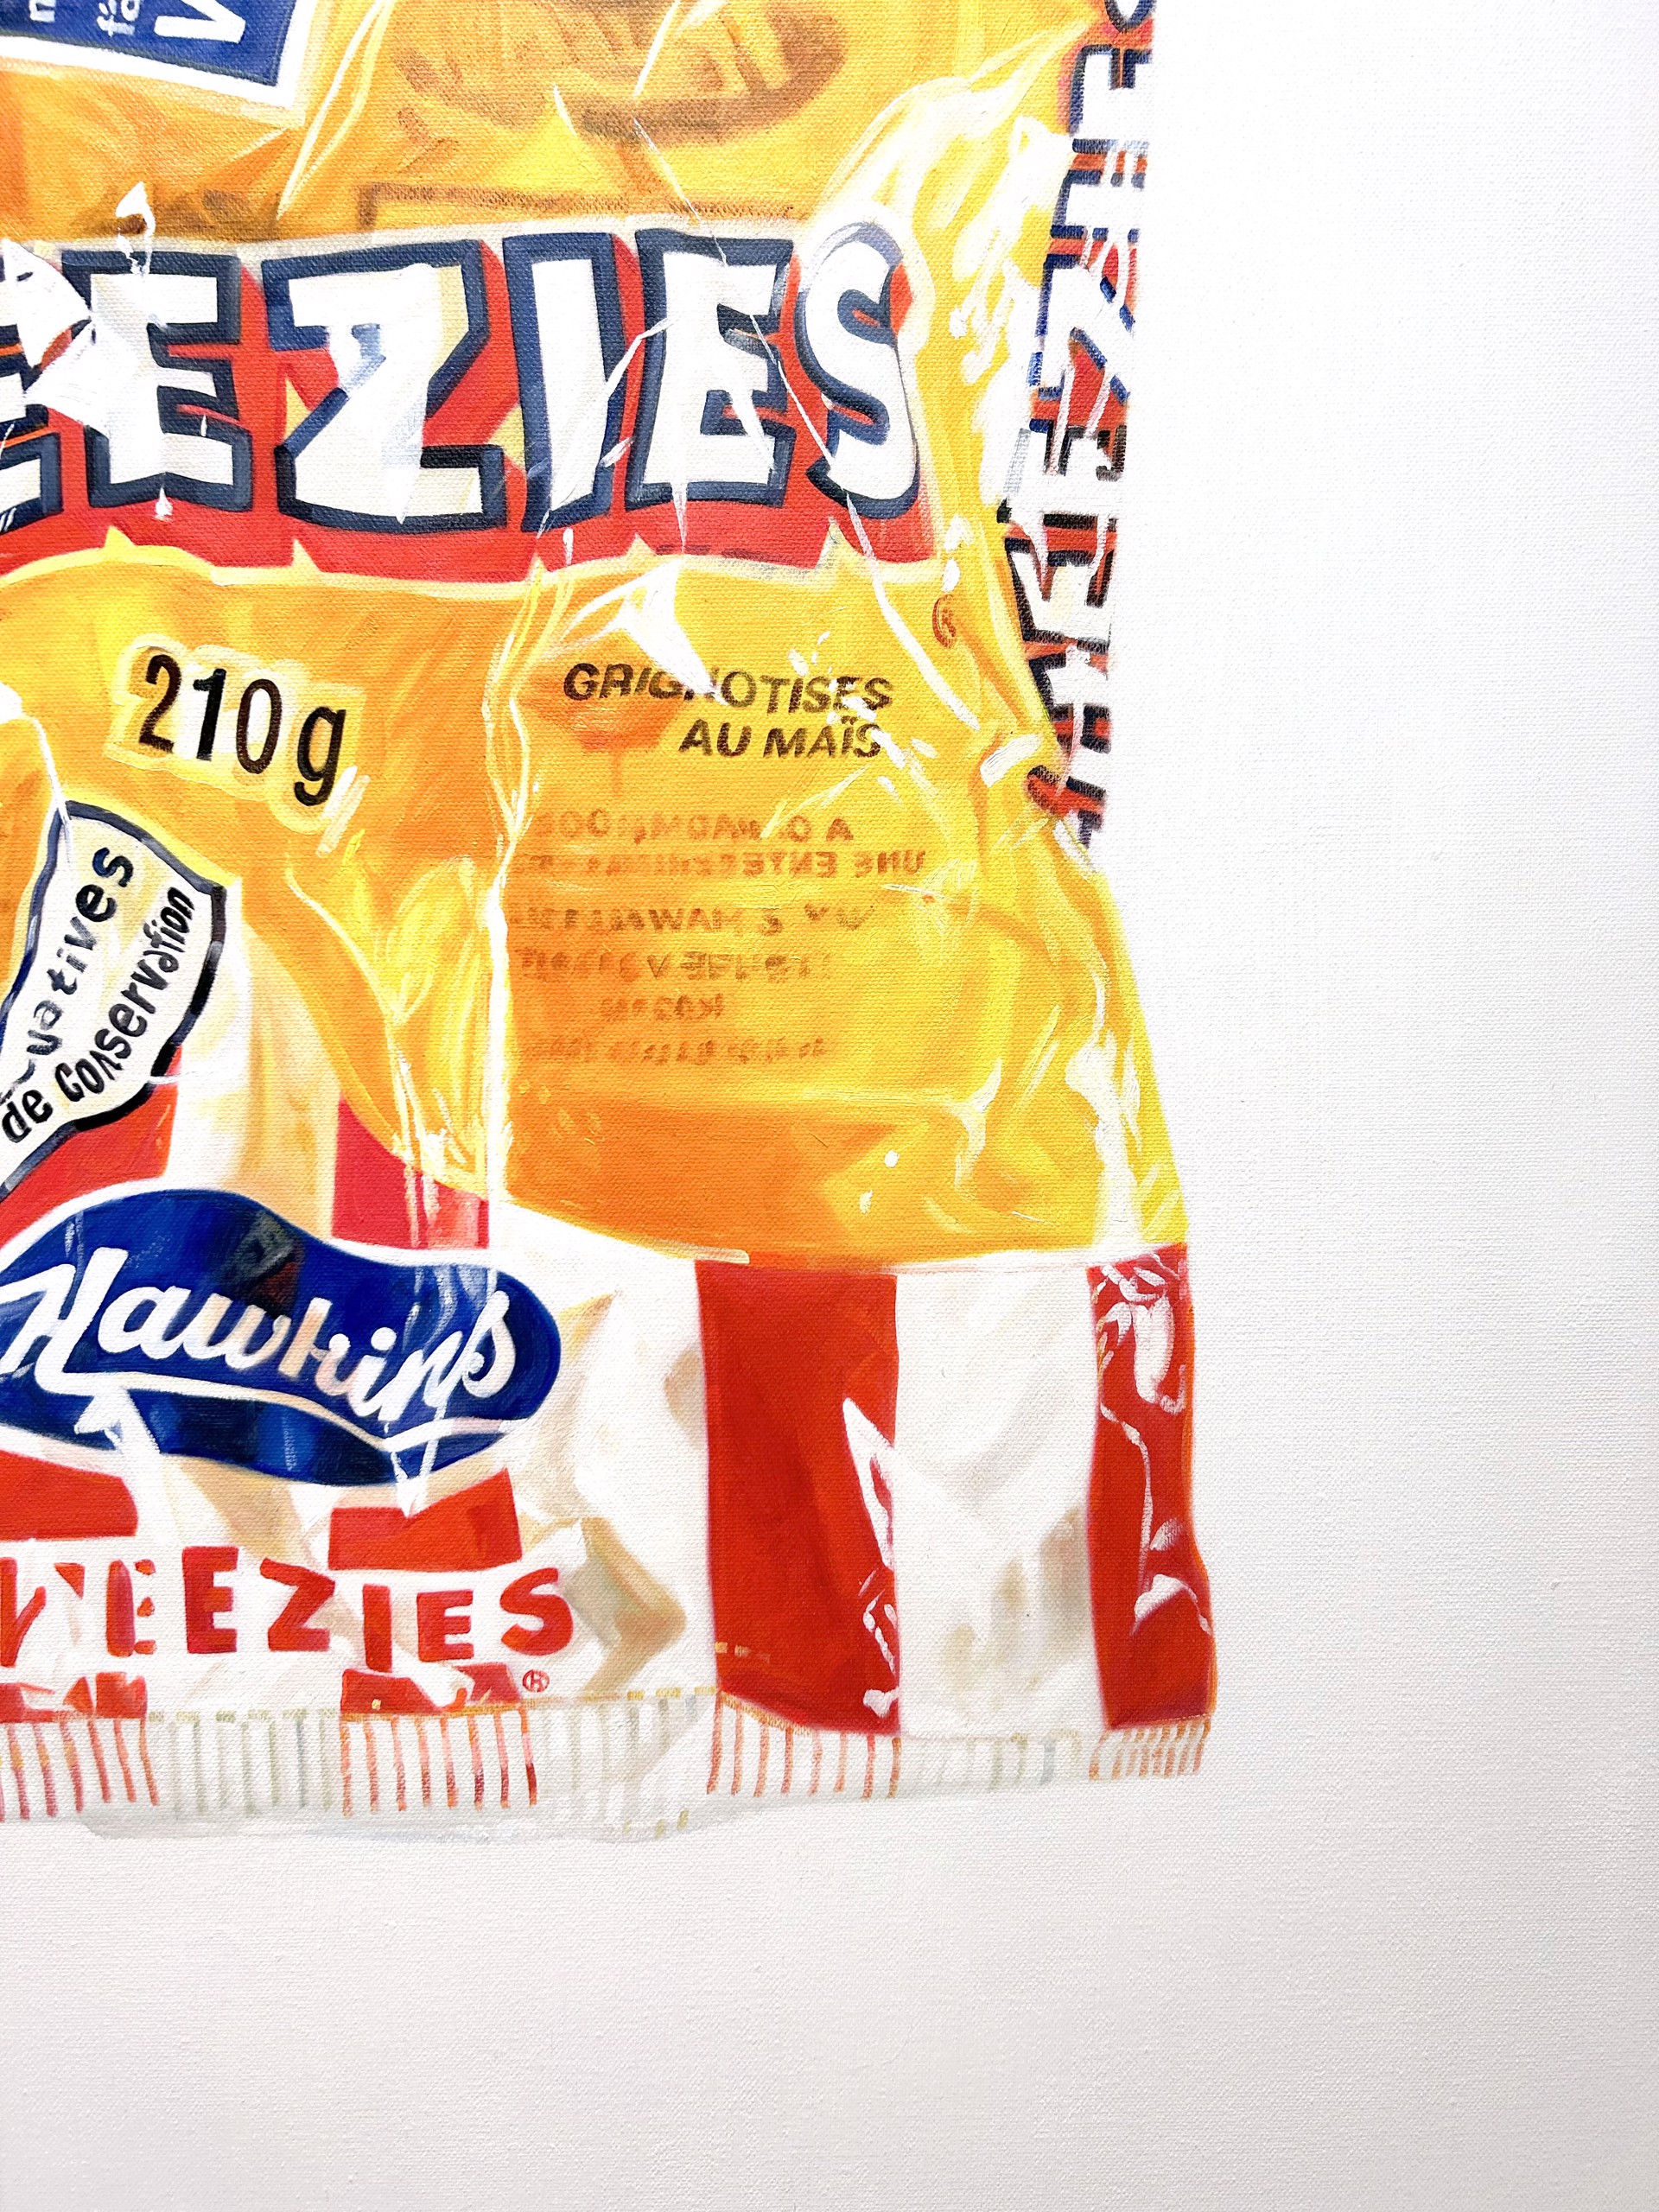 Cheezies Bag No.41 by Maggie Hall